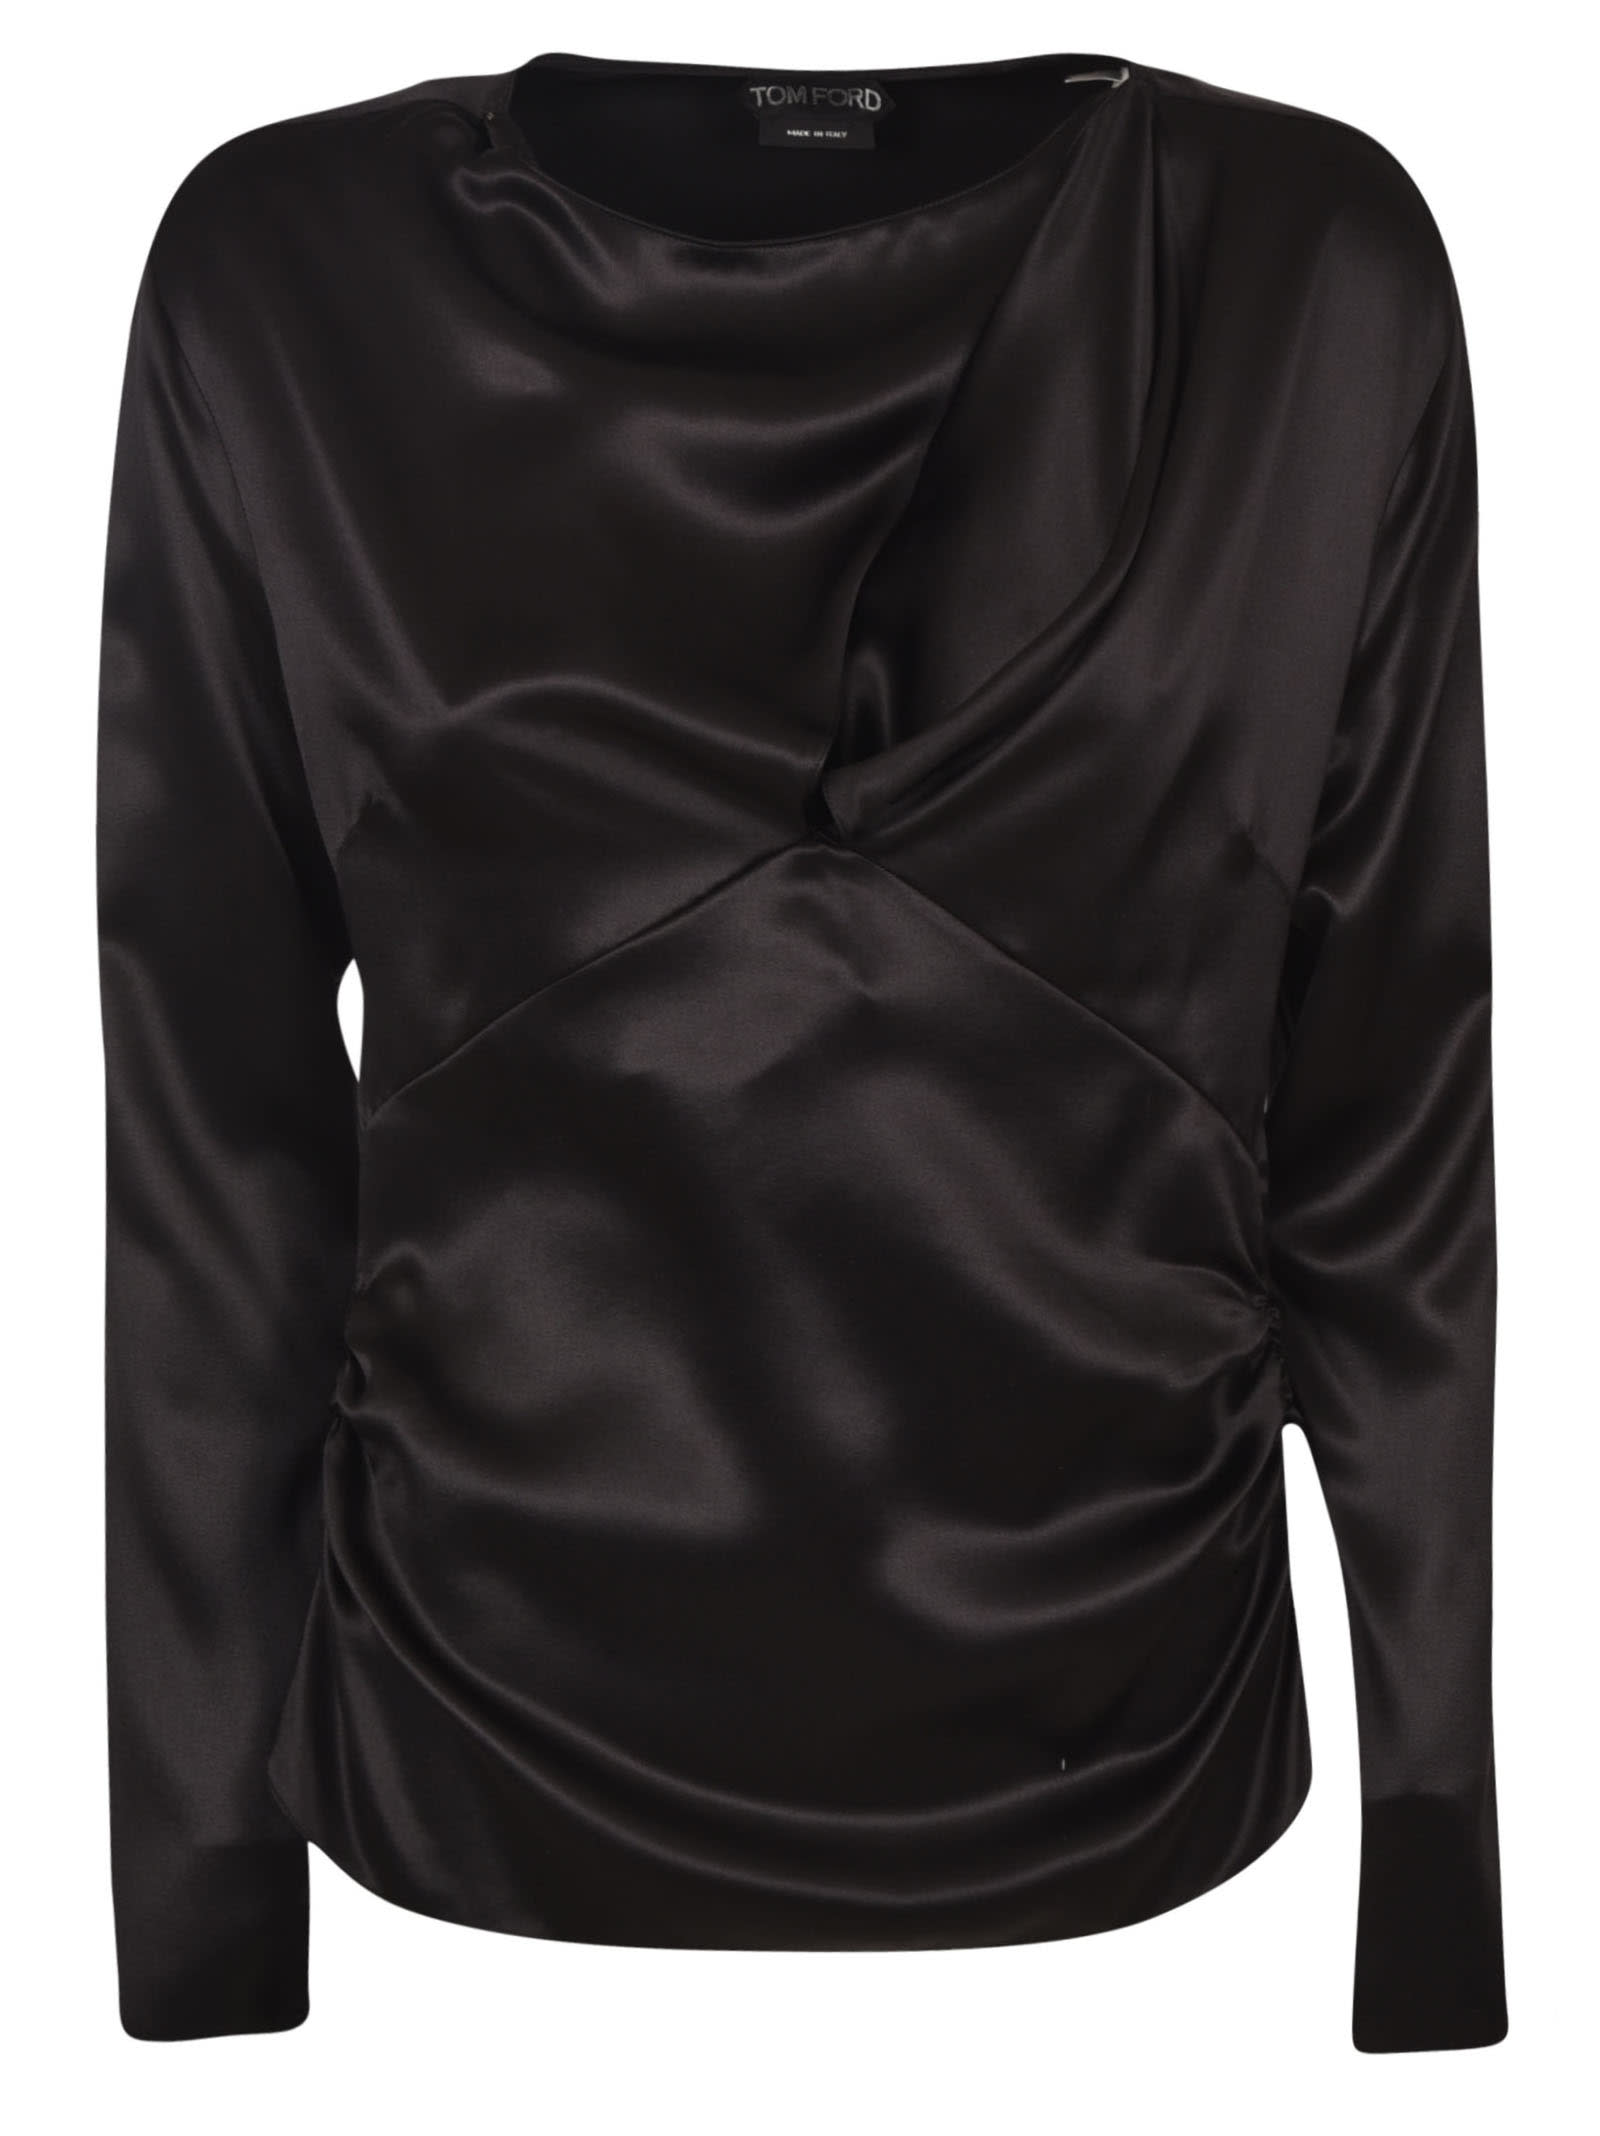 Tom Ford Round Neck Long-Sleeved Top